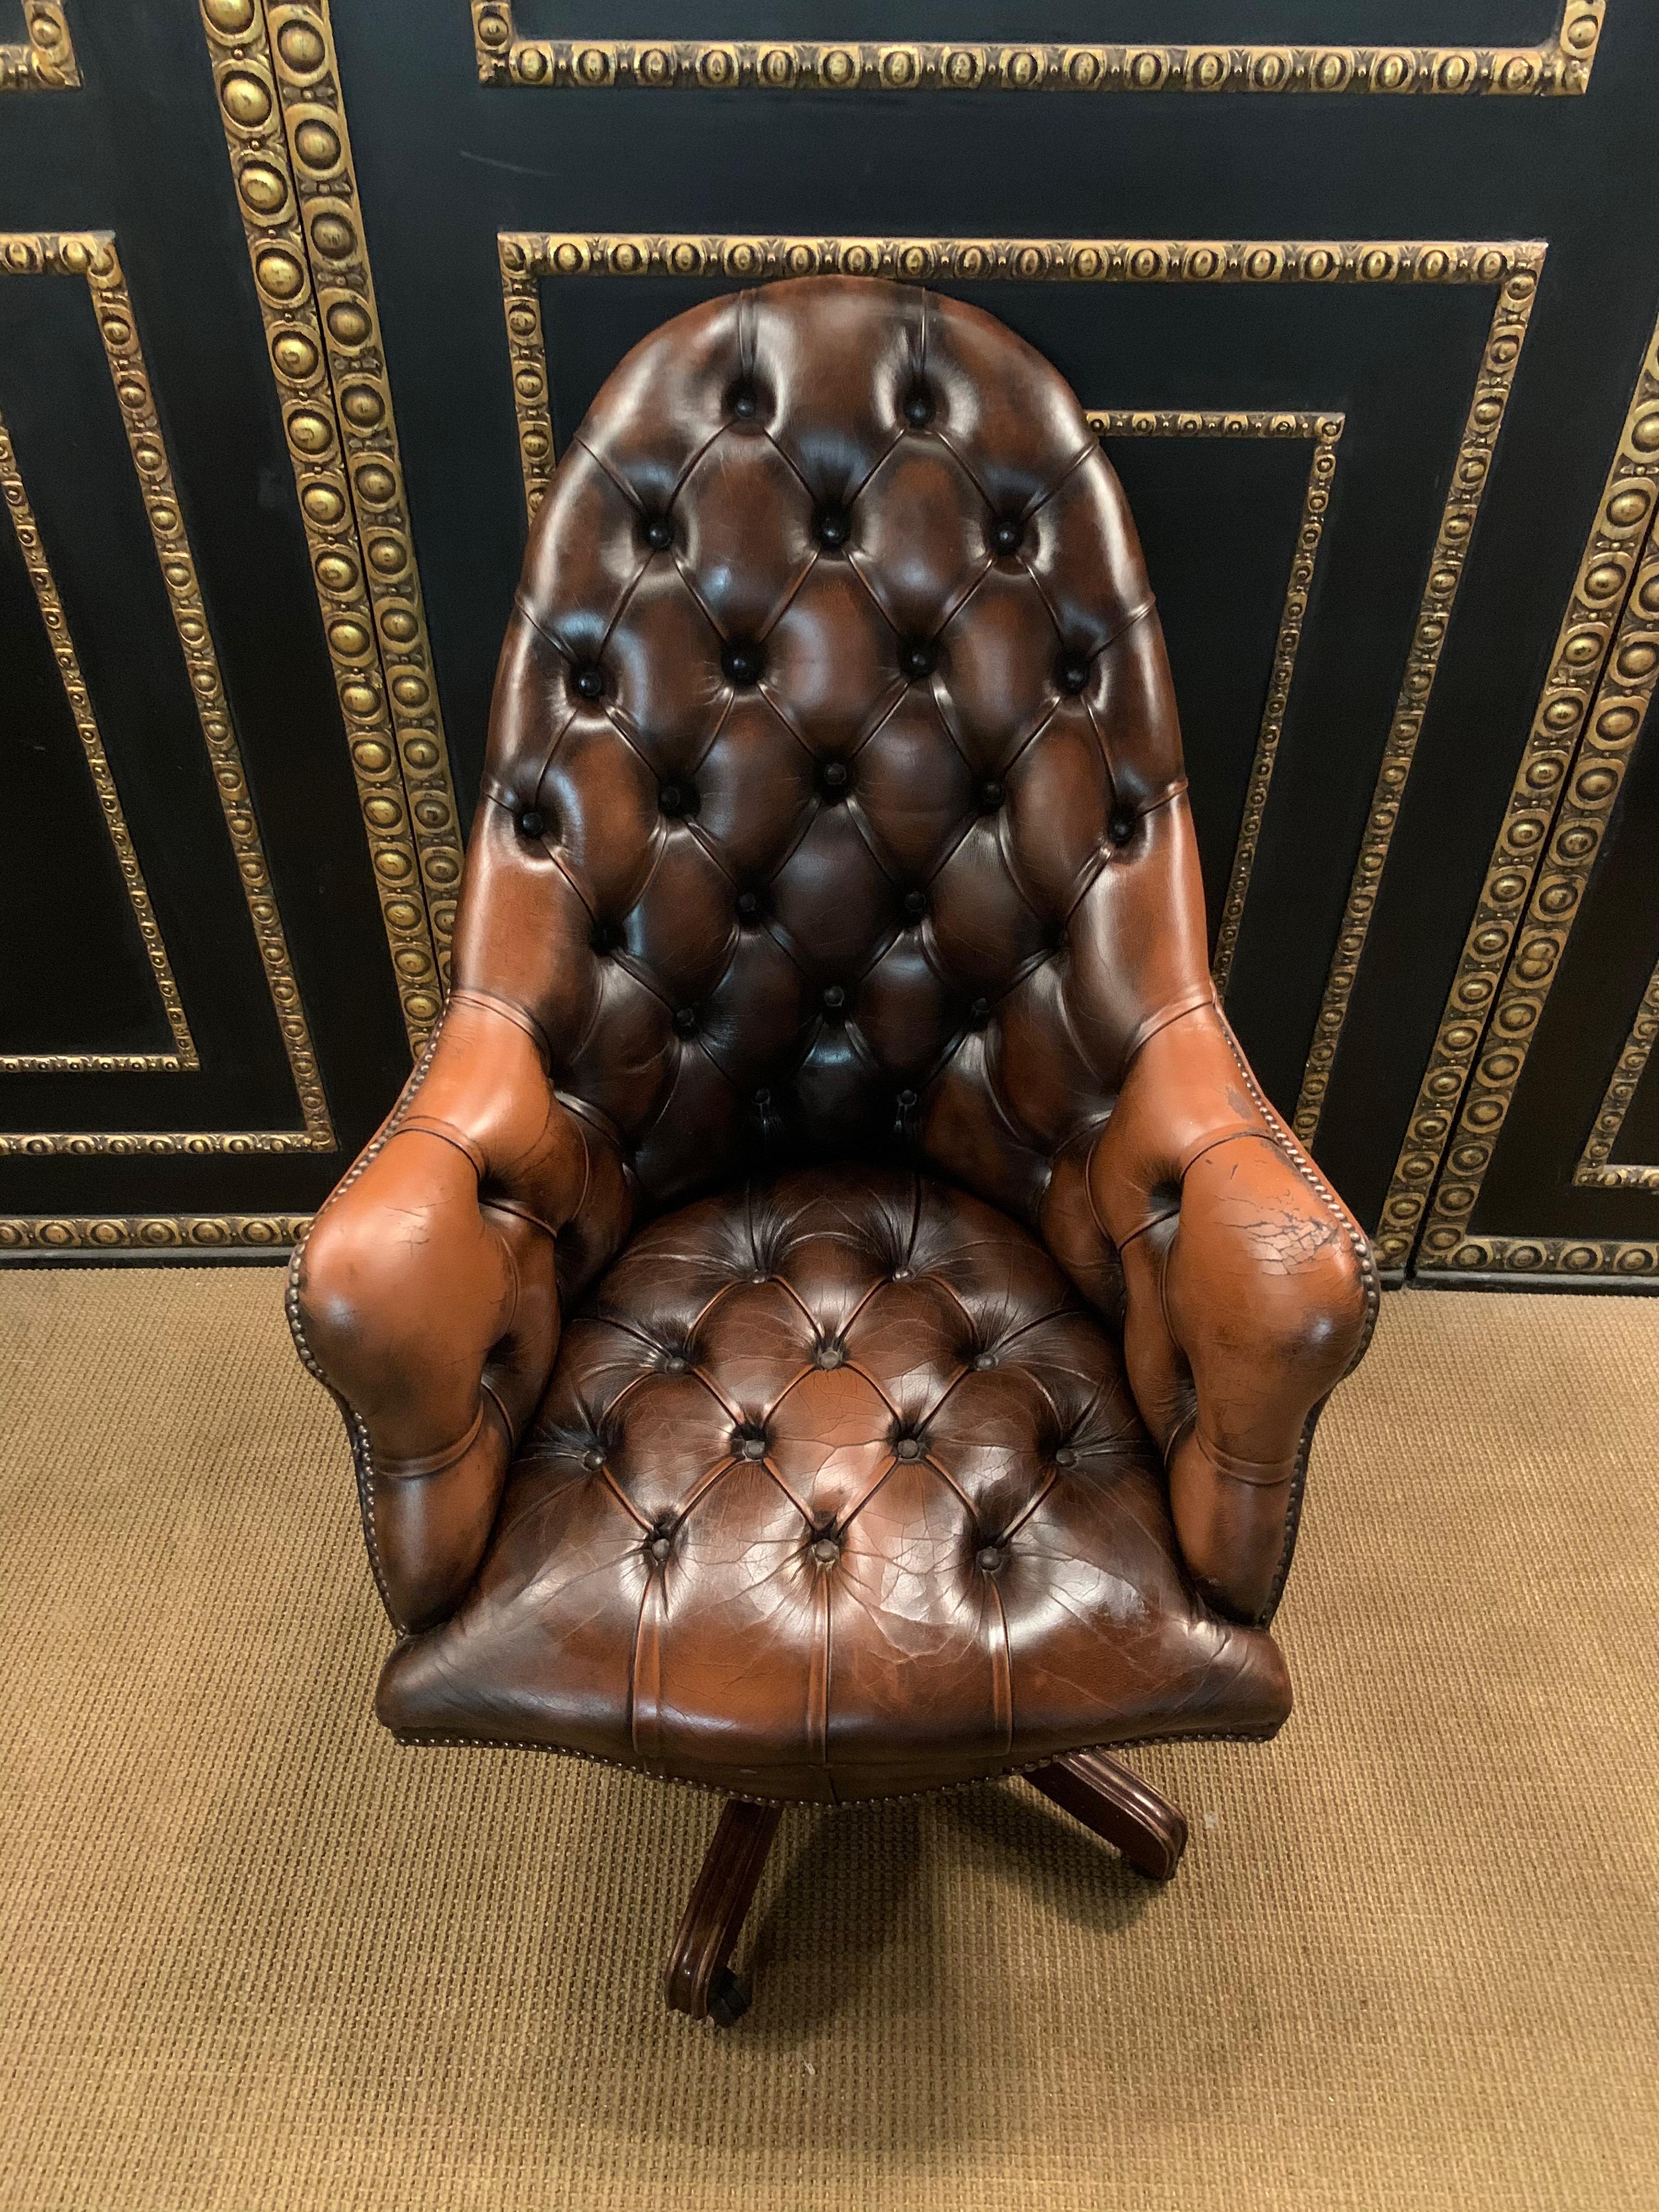 We are delighted to offer this lovely original vintage hand dyed Mahogany brown leather Chesterfield tufted directors chair A very good looking well made and comfortable directors chair. Its Chesterfield buttoned both back and base, the seat